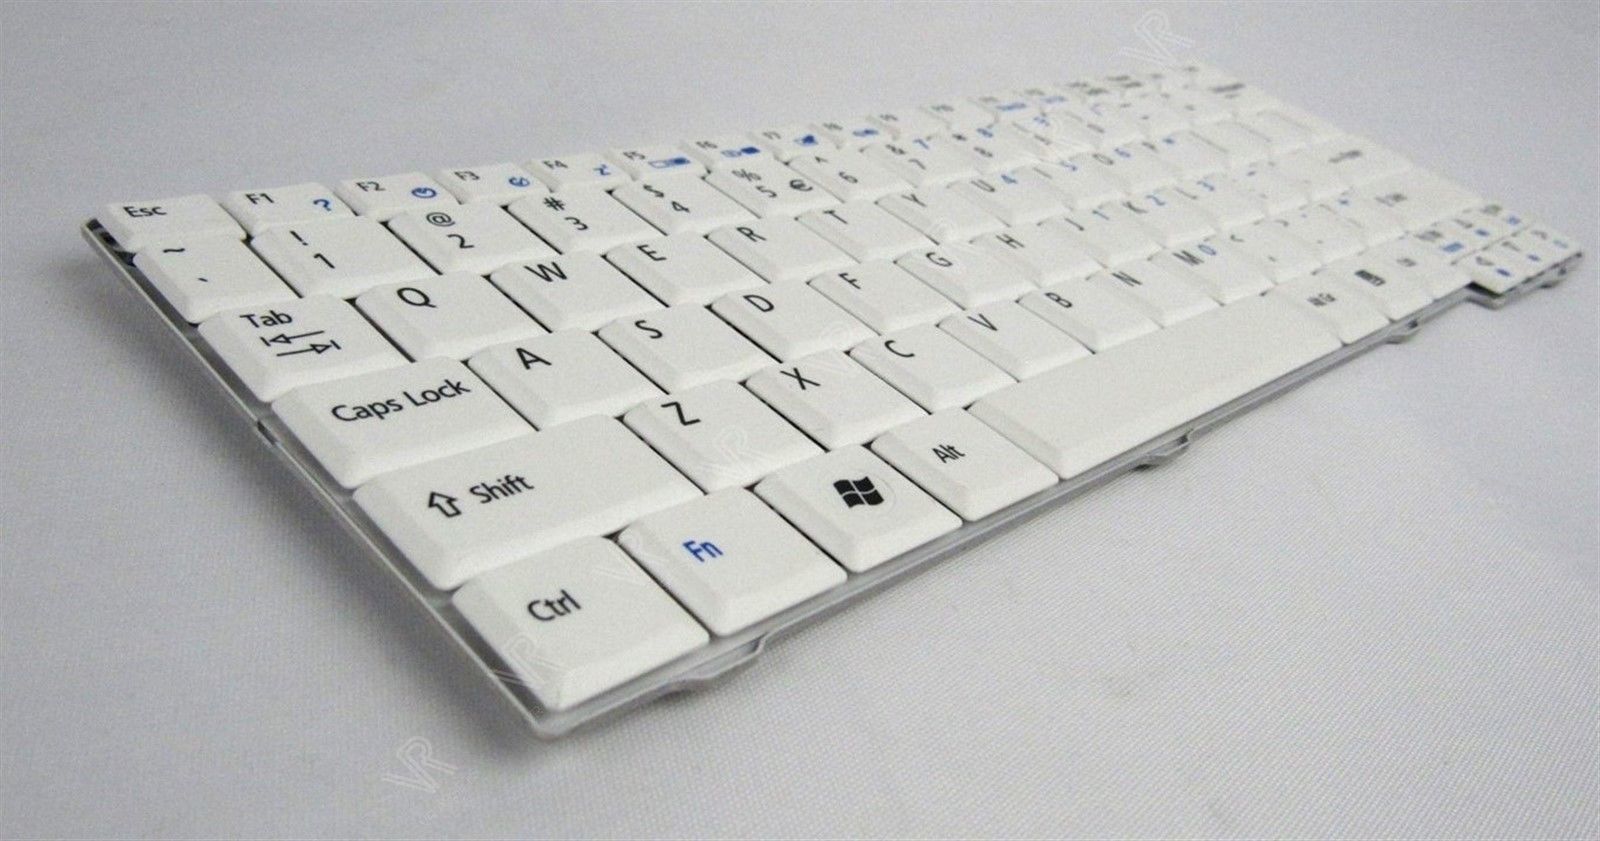 Acer Aspire One Series A150-1178 US Keyboard White K-ACR-19-W 9J.N9482.21D